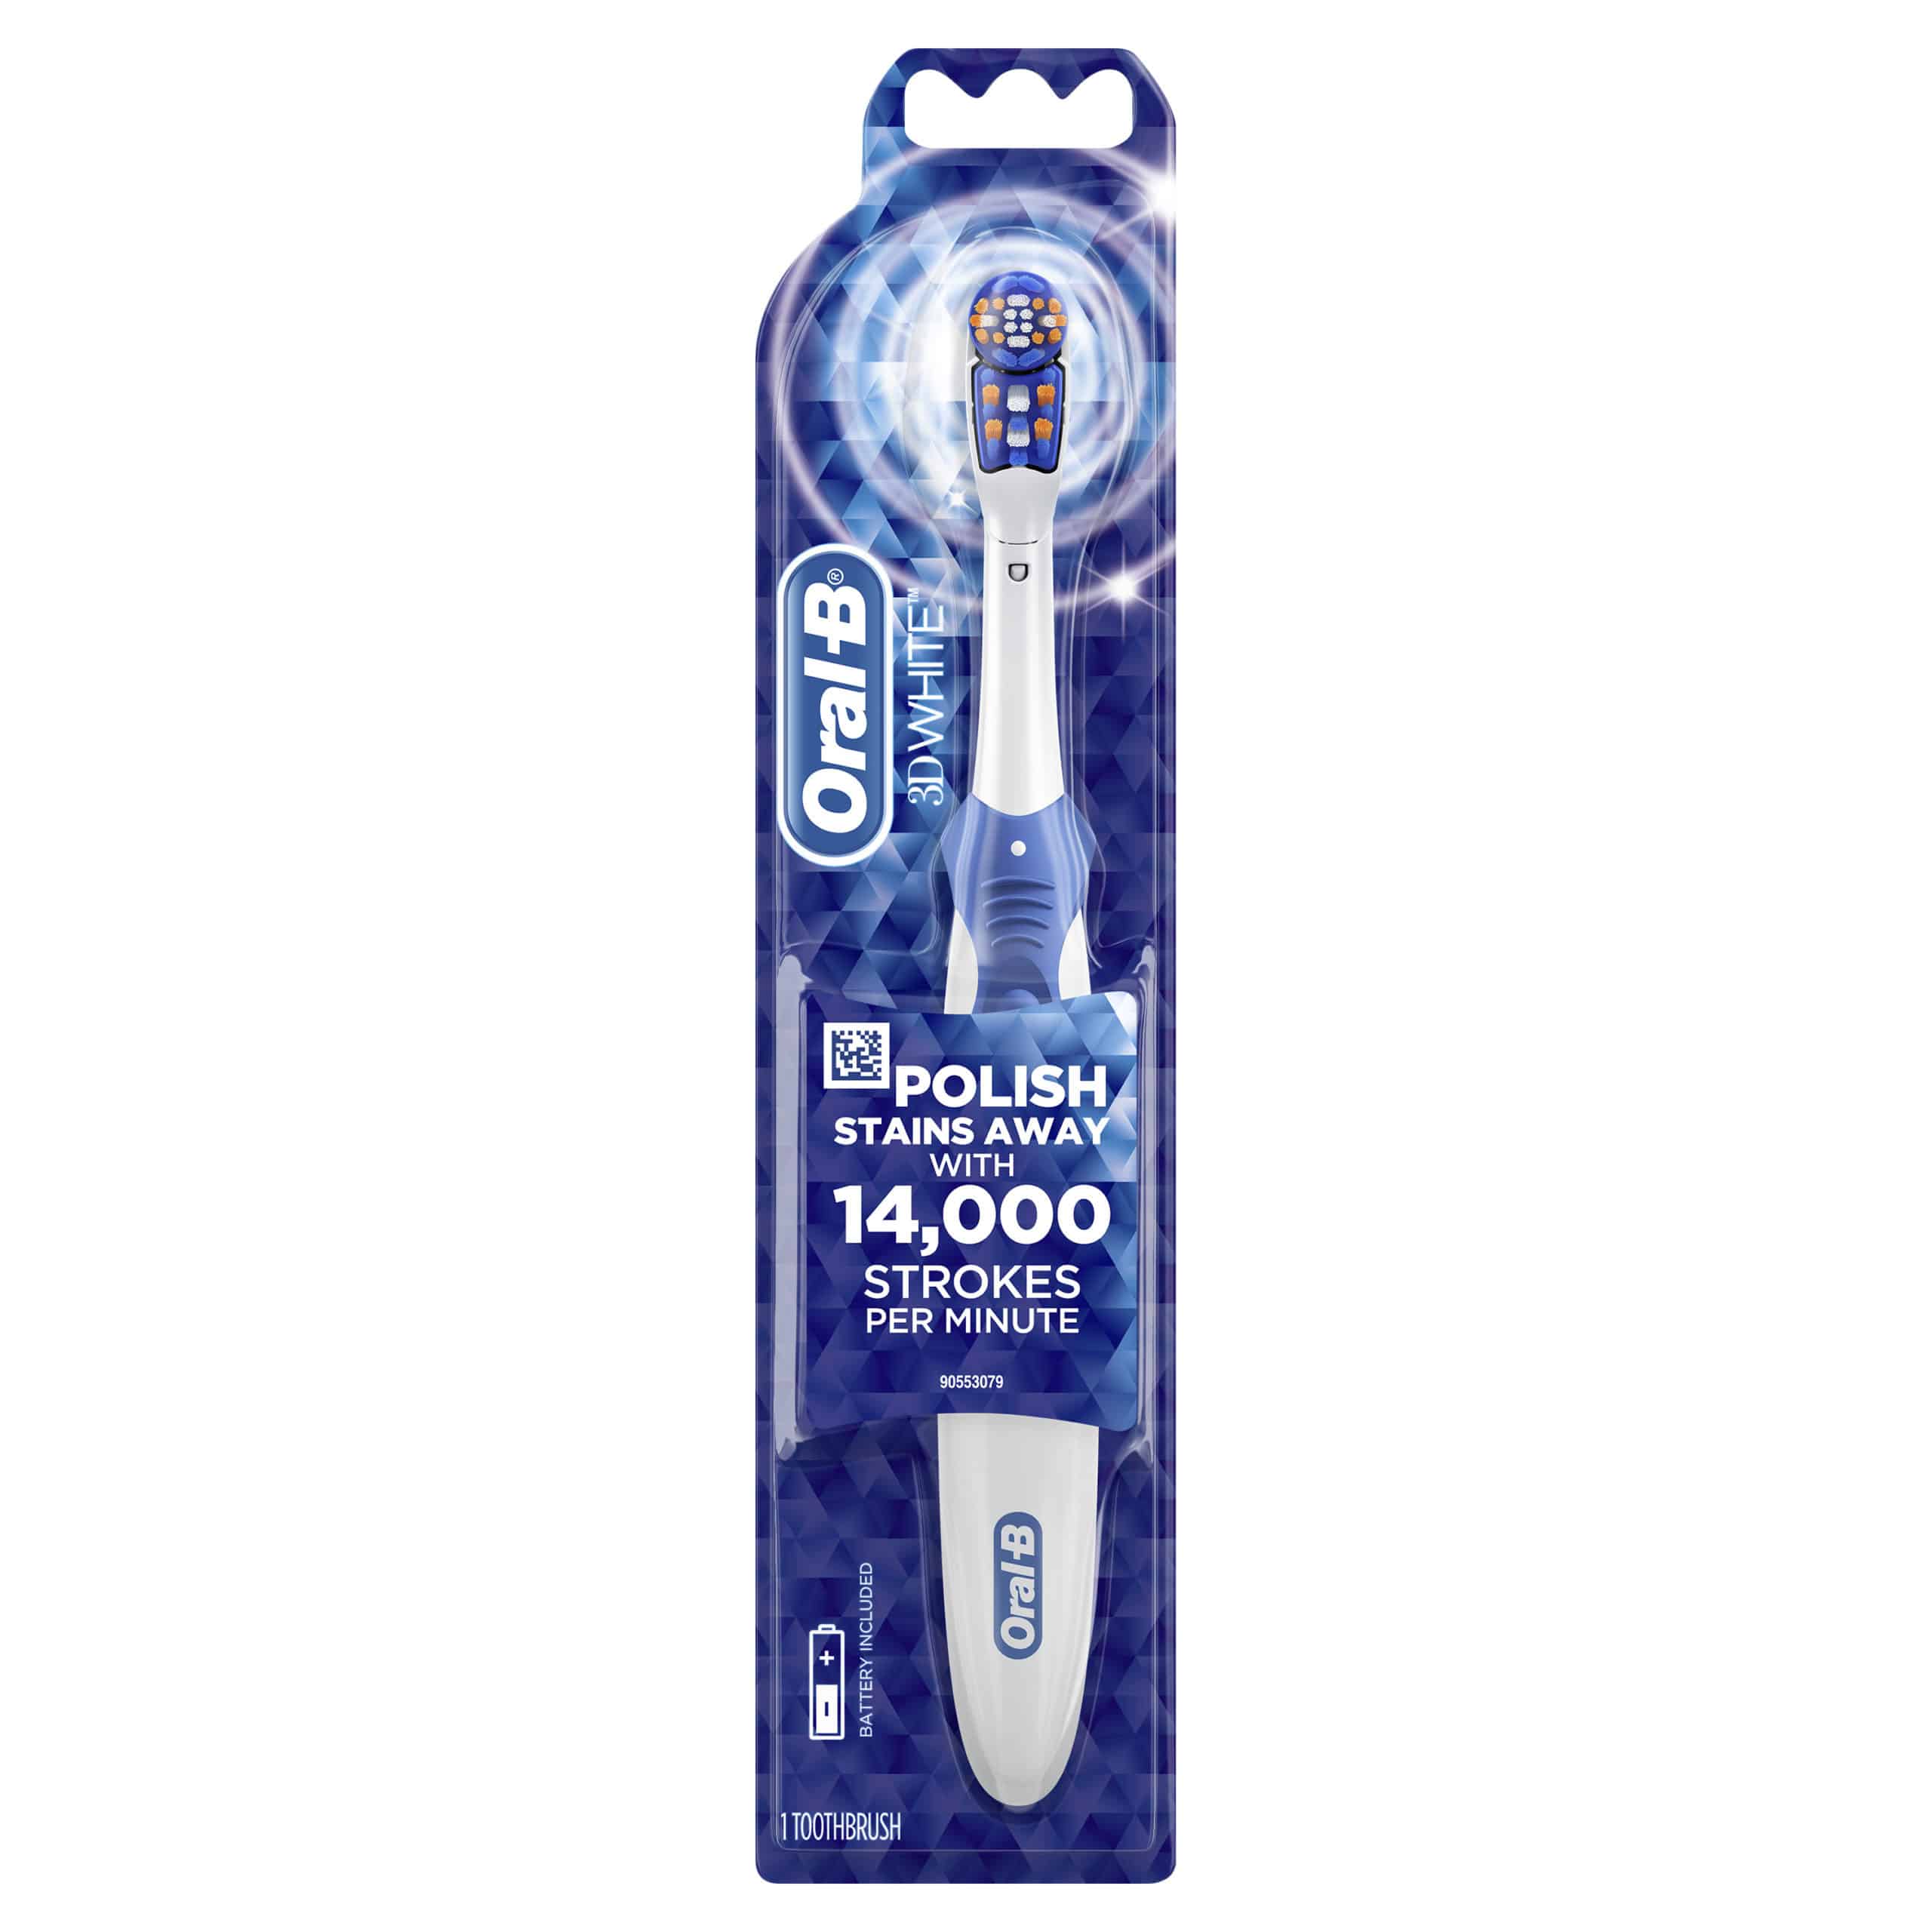 Oral-B 3D White Electric Toothbrush, Battery Power